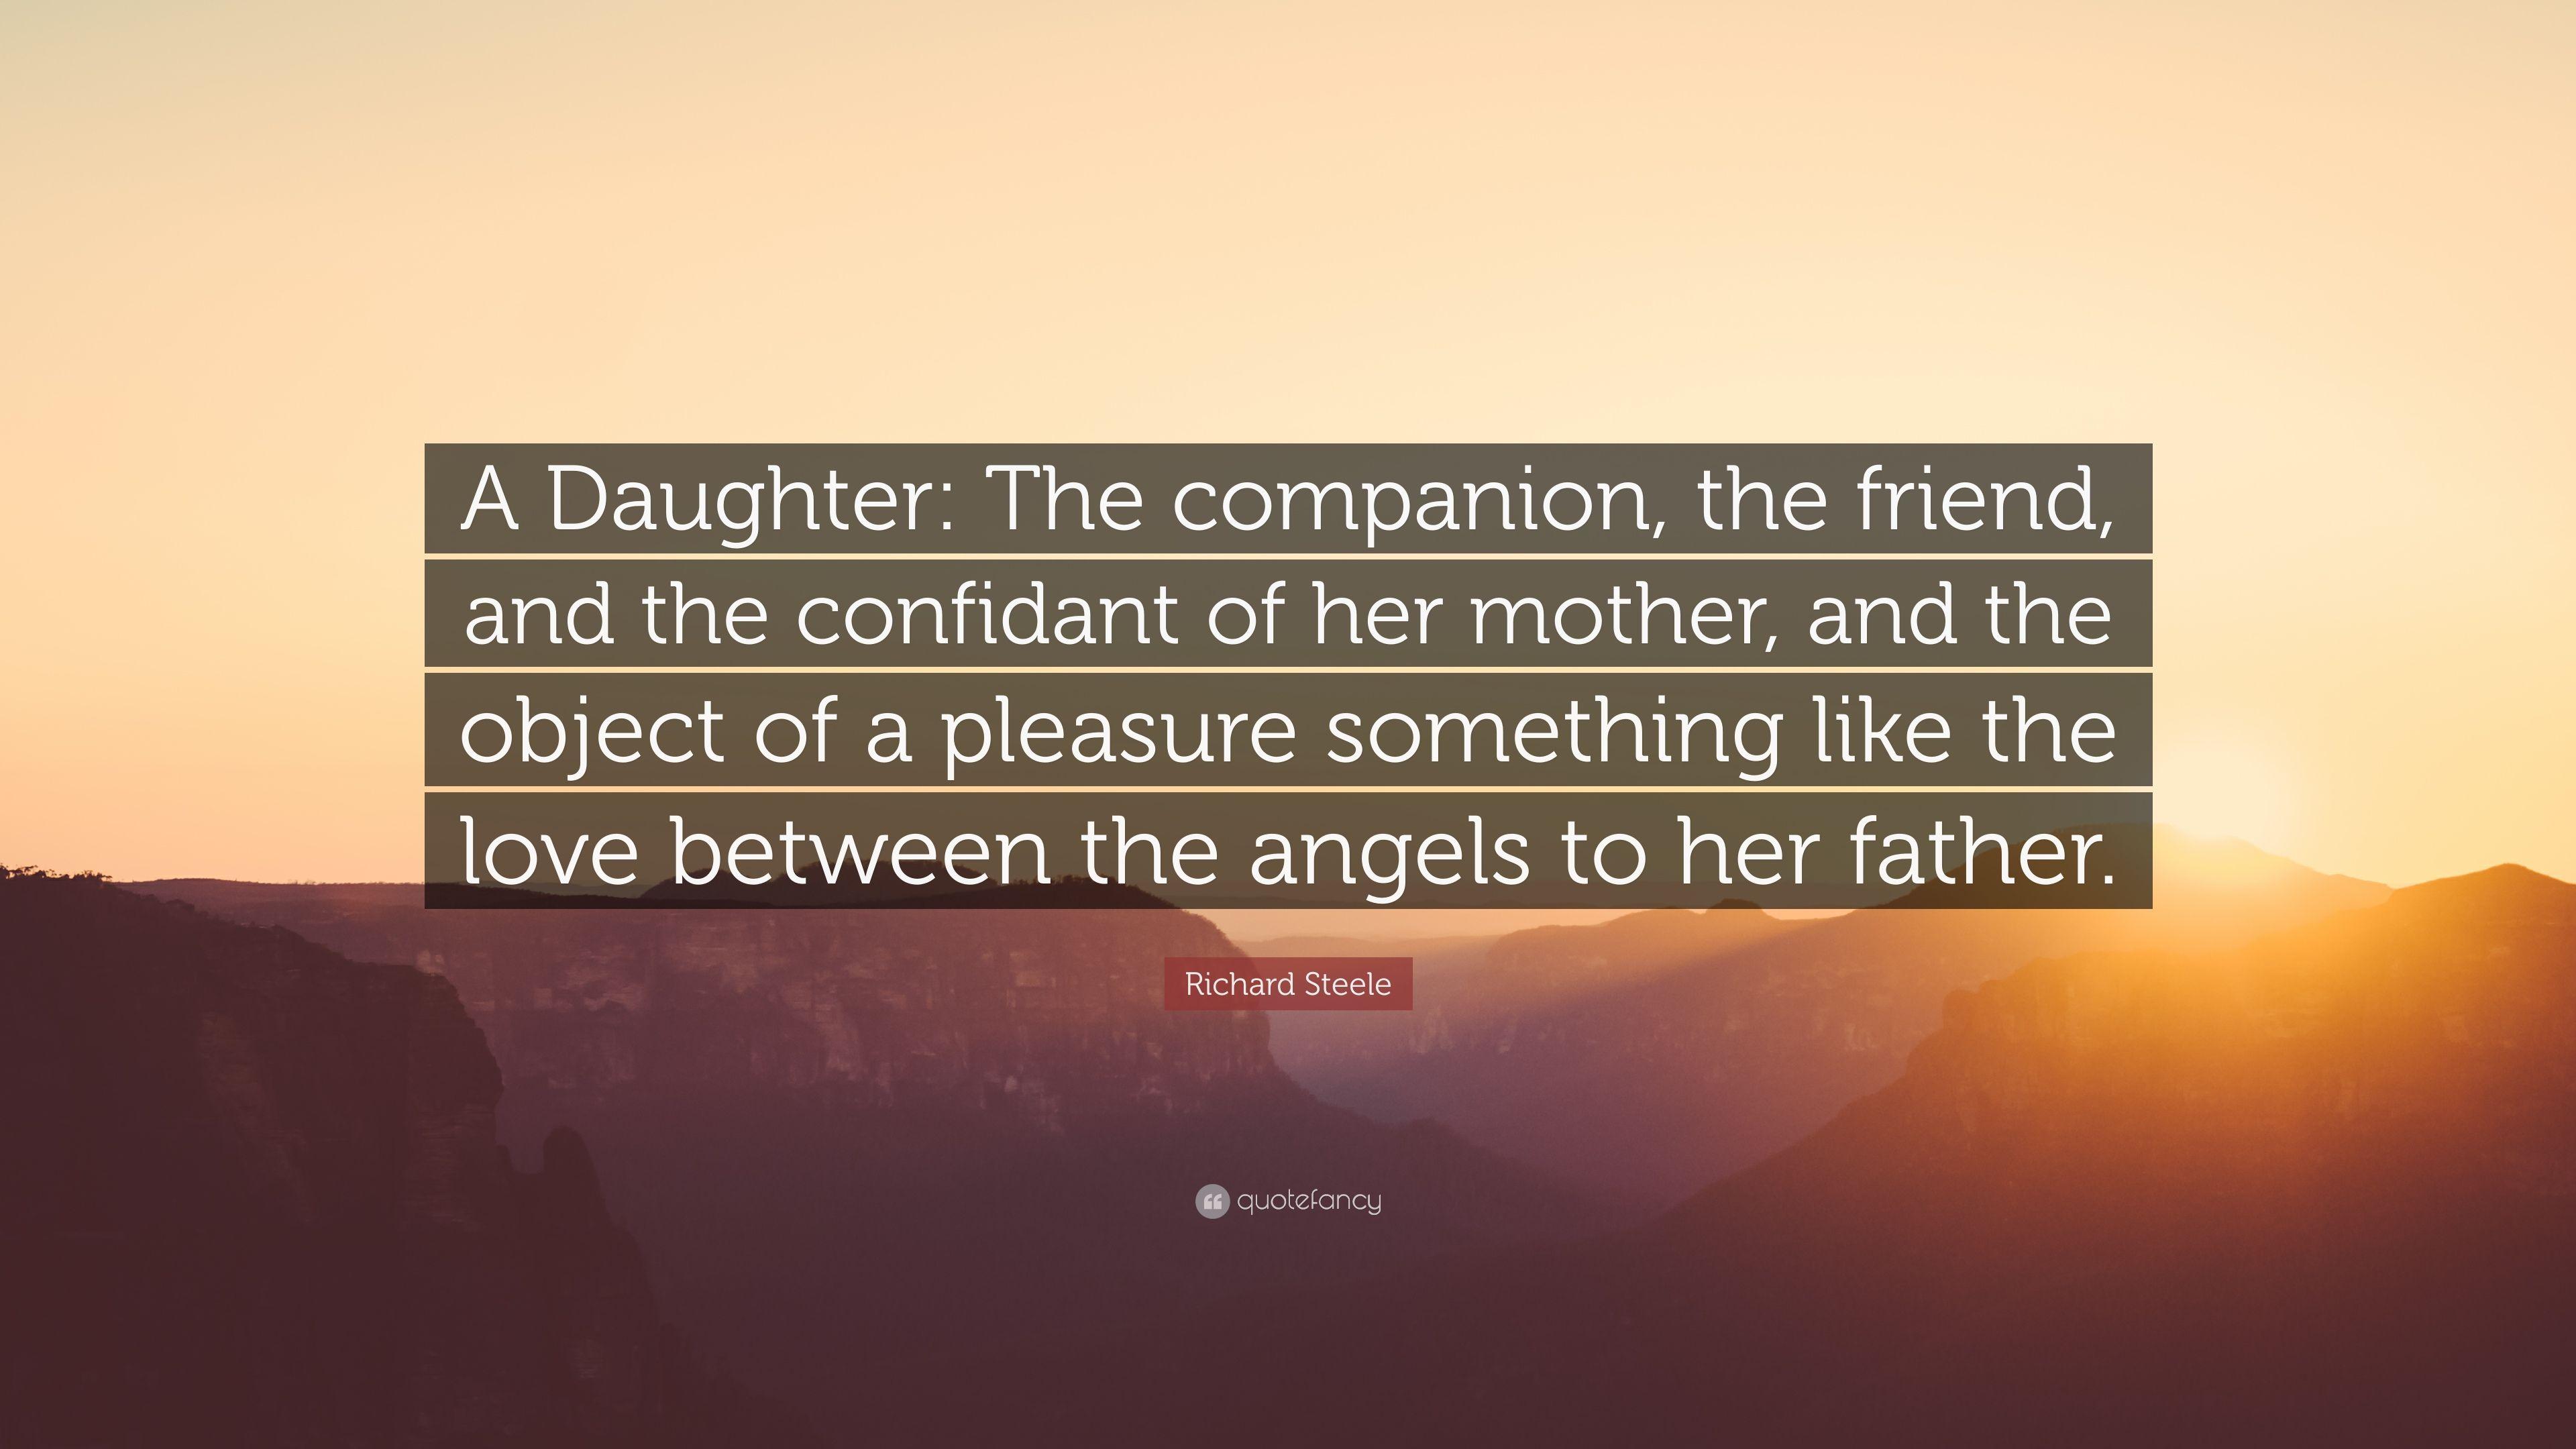 Richard Steele Quote: “A Daughter: The companion, the friend